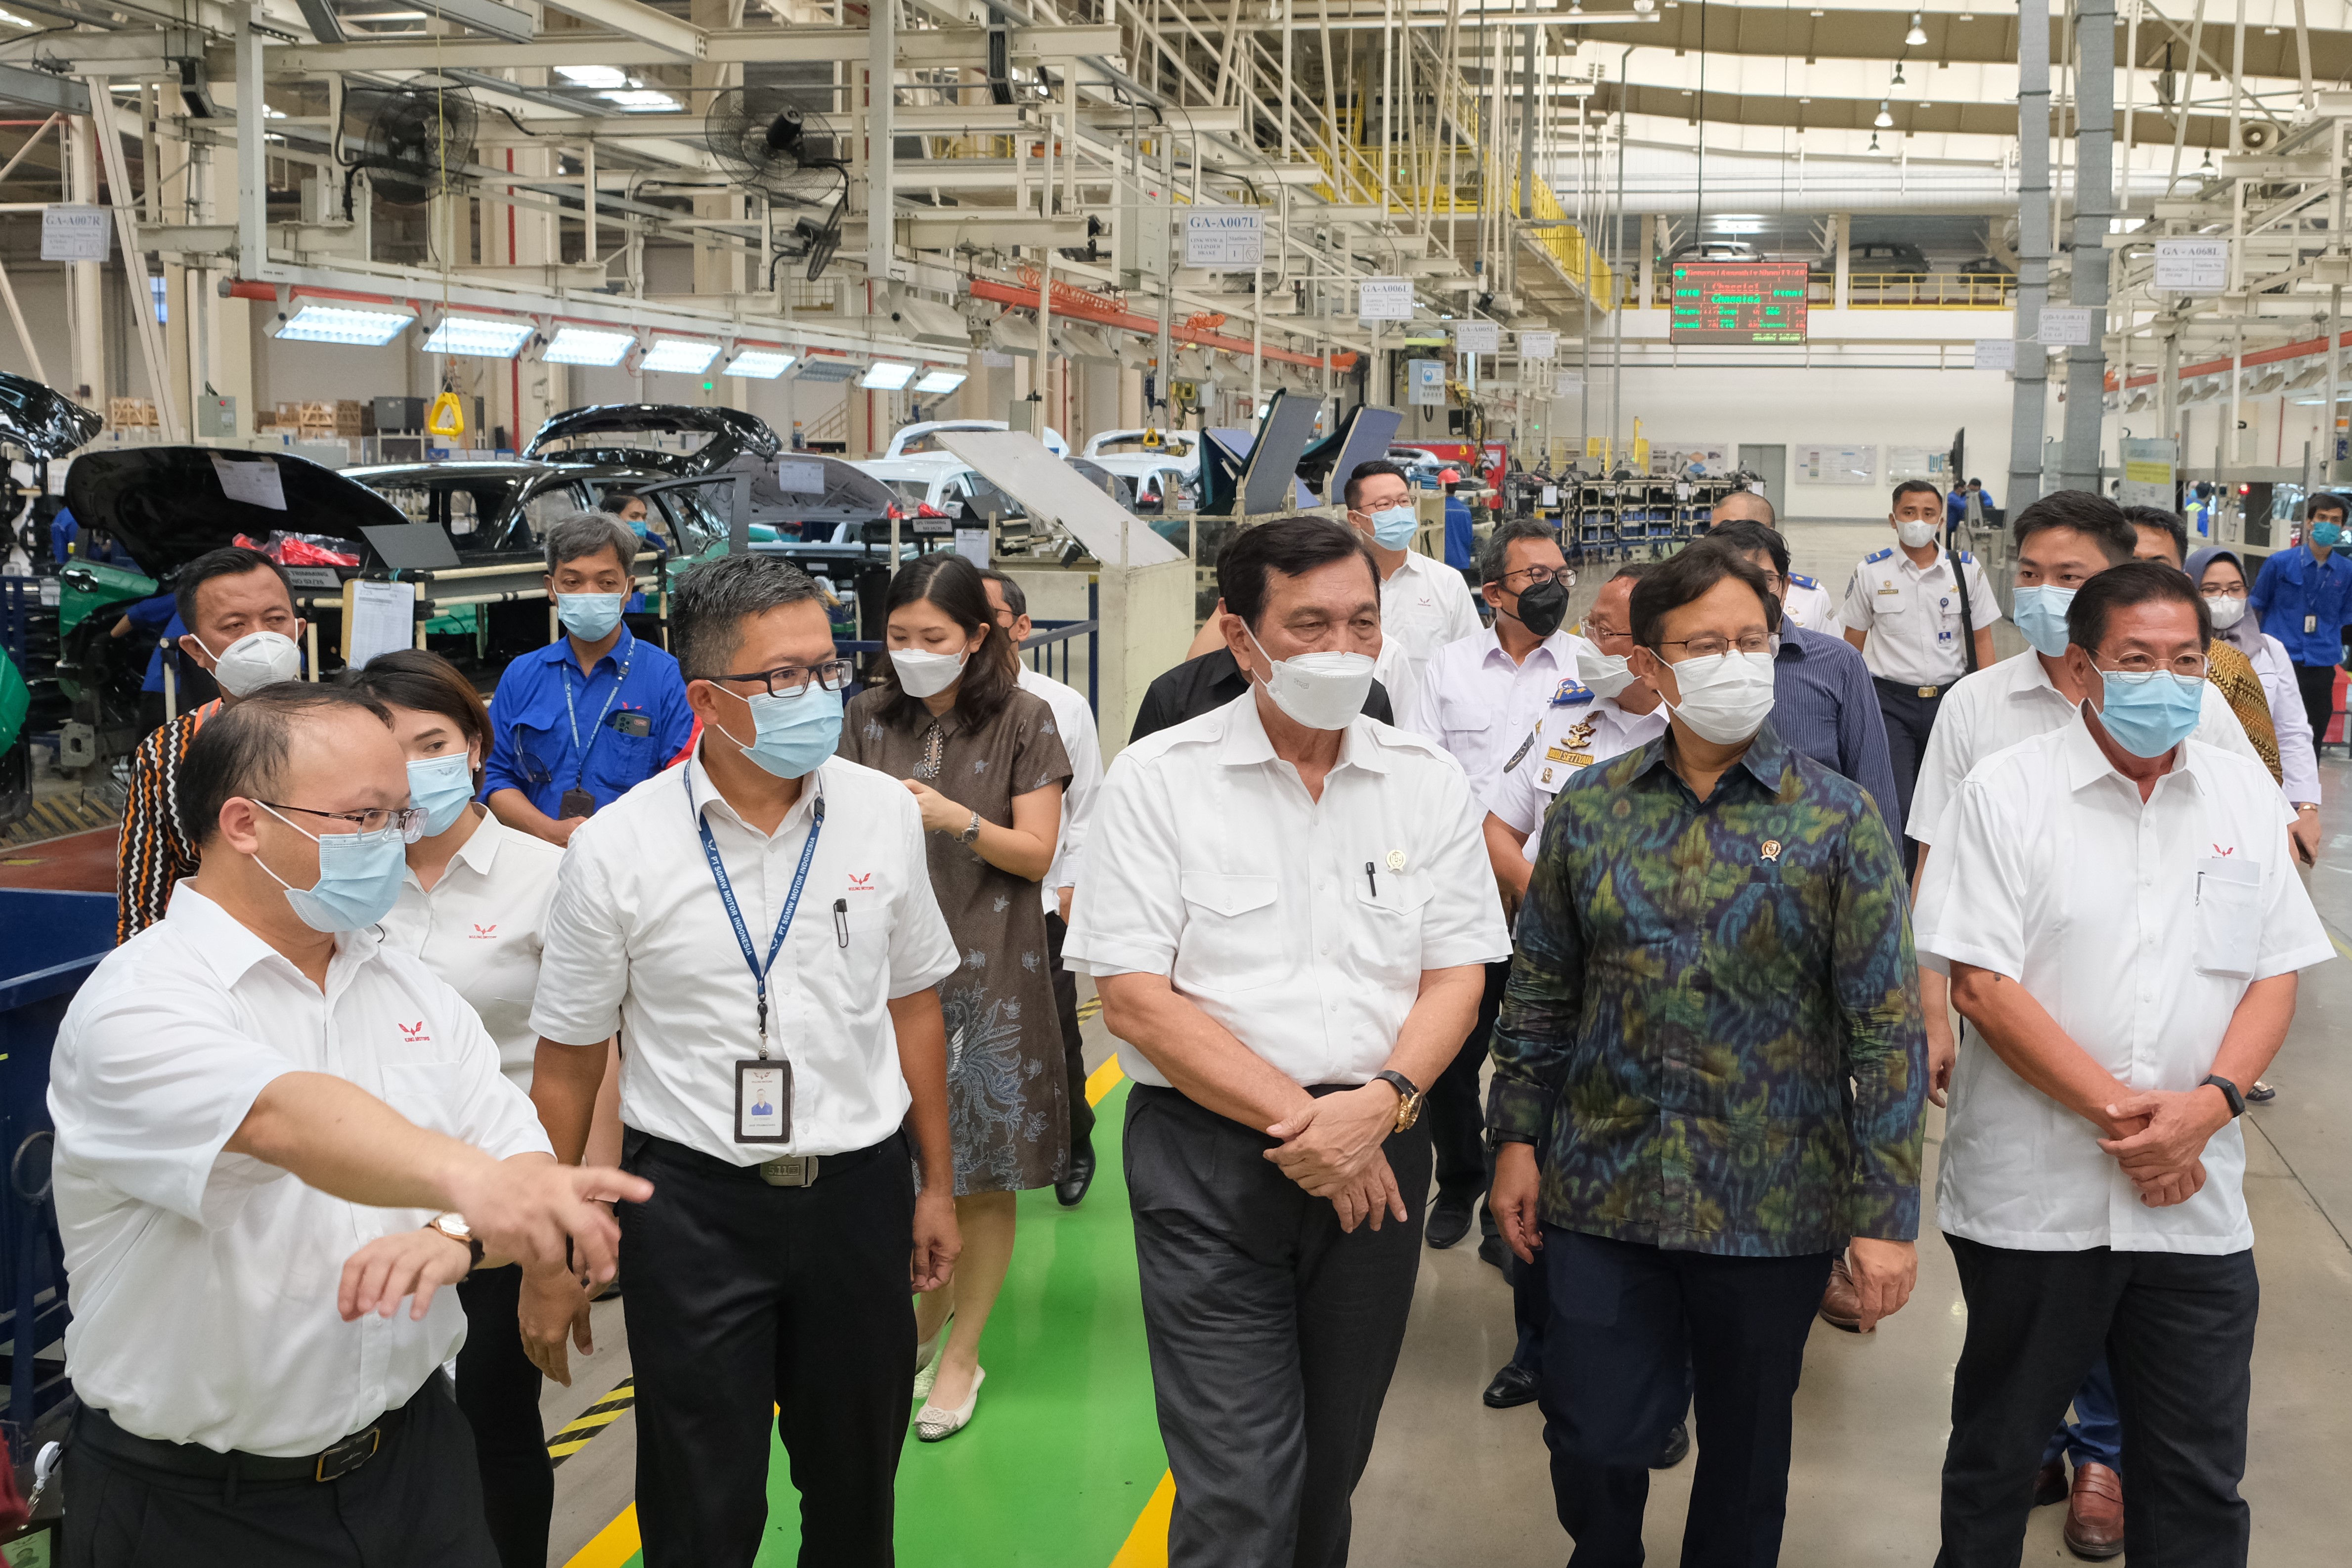 Image Coordinating Minister for Marves, Minister of Transportation, and Minister of Health Visit Wuling Factory